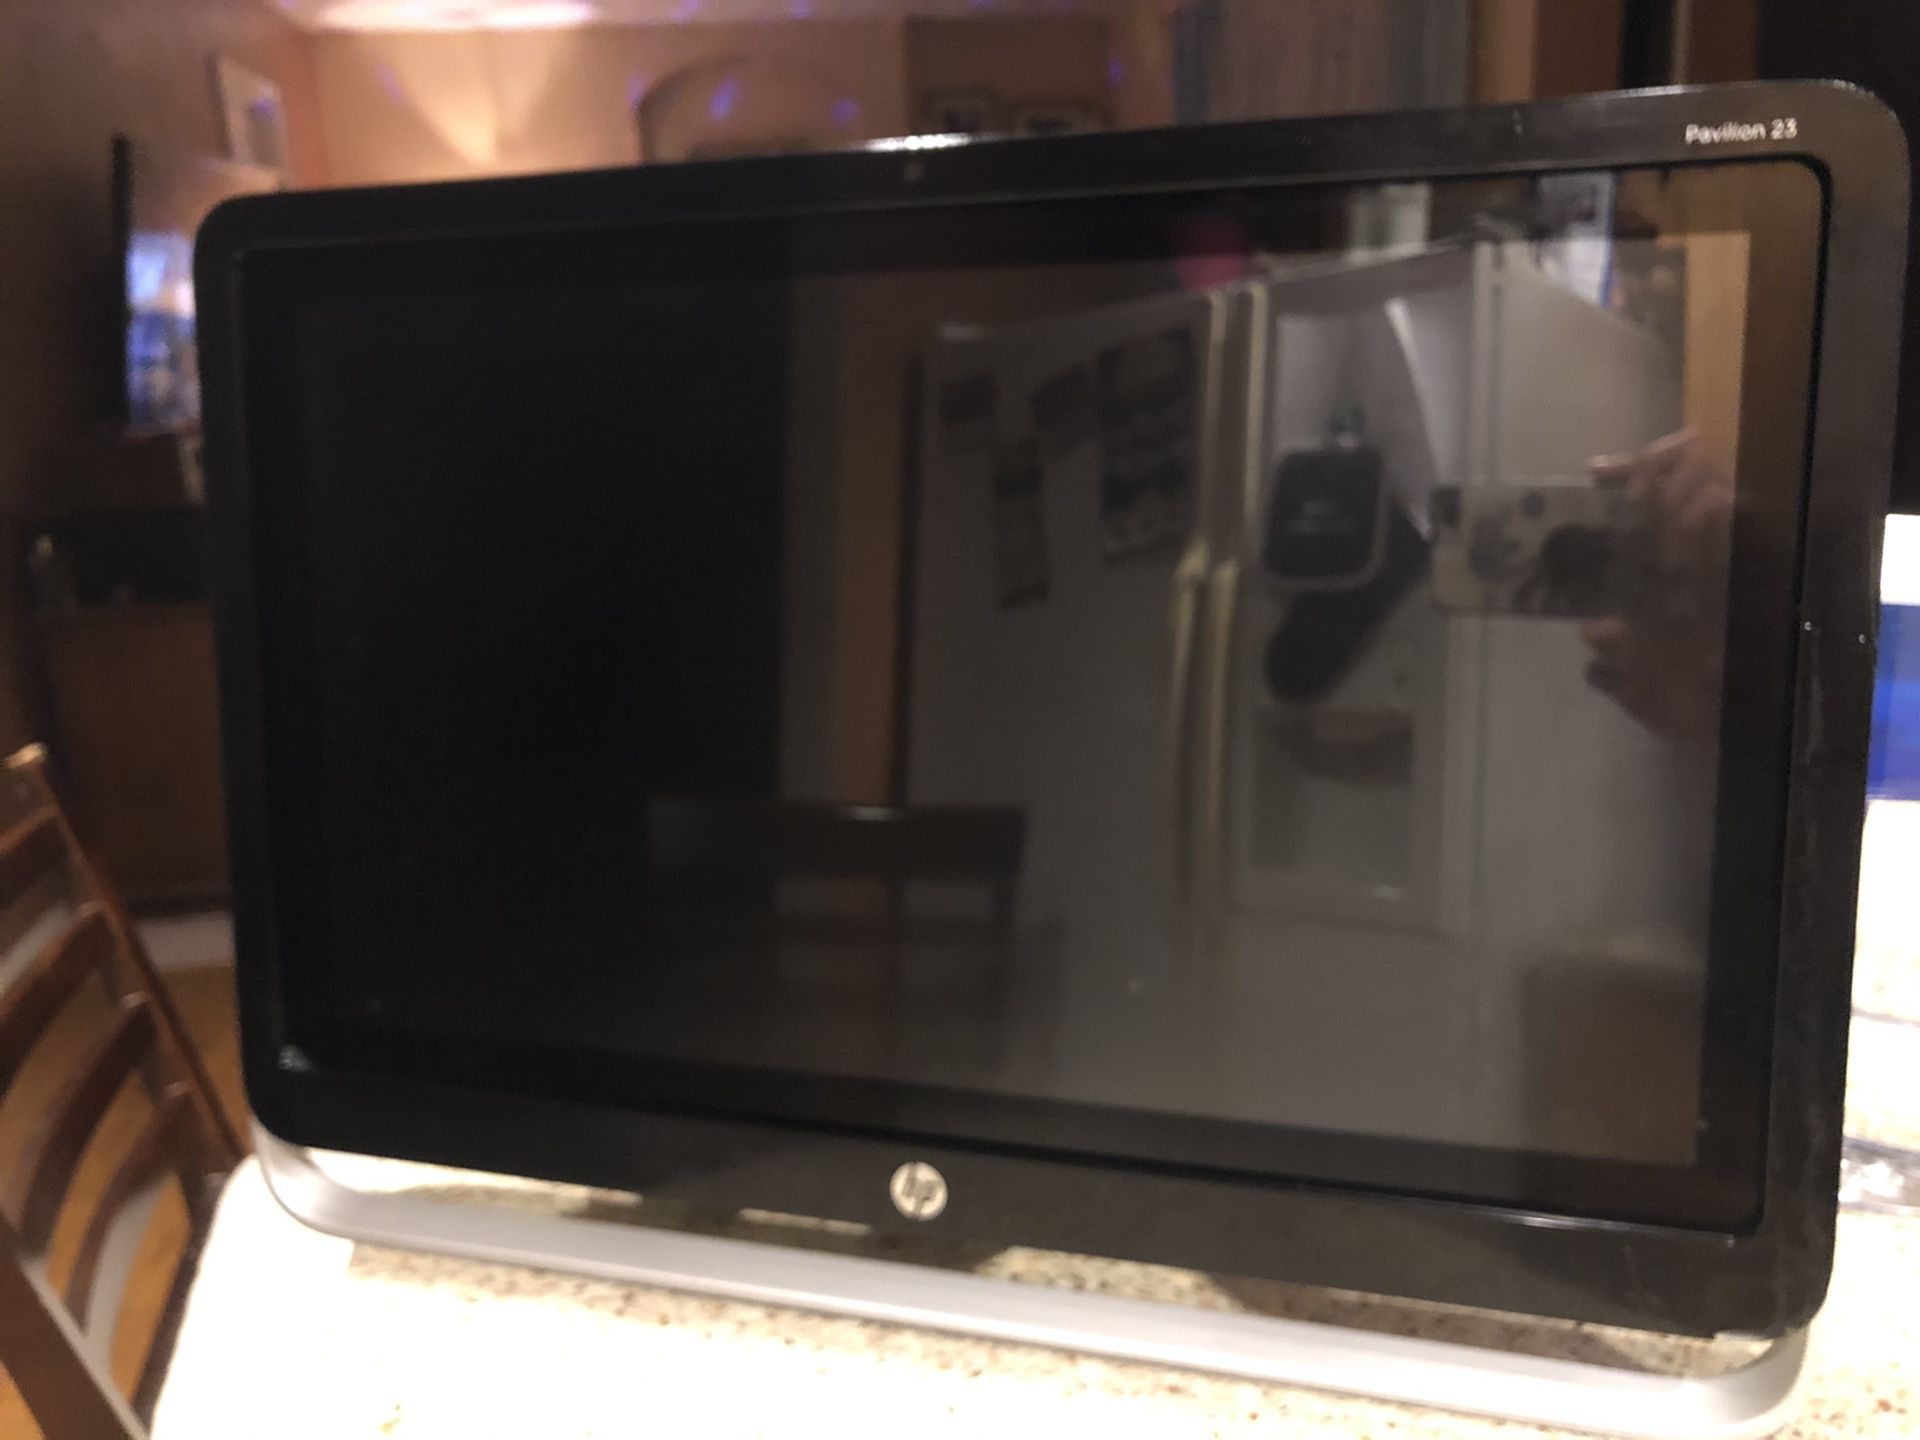 HP 23 inches computer monitor